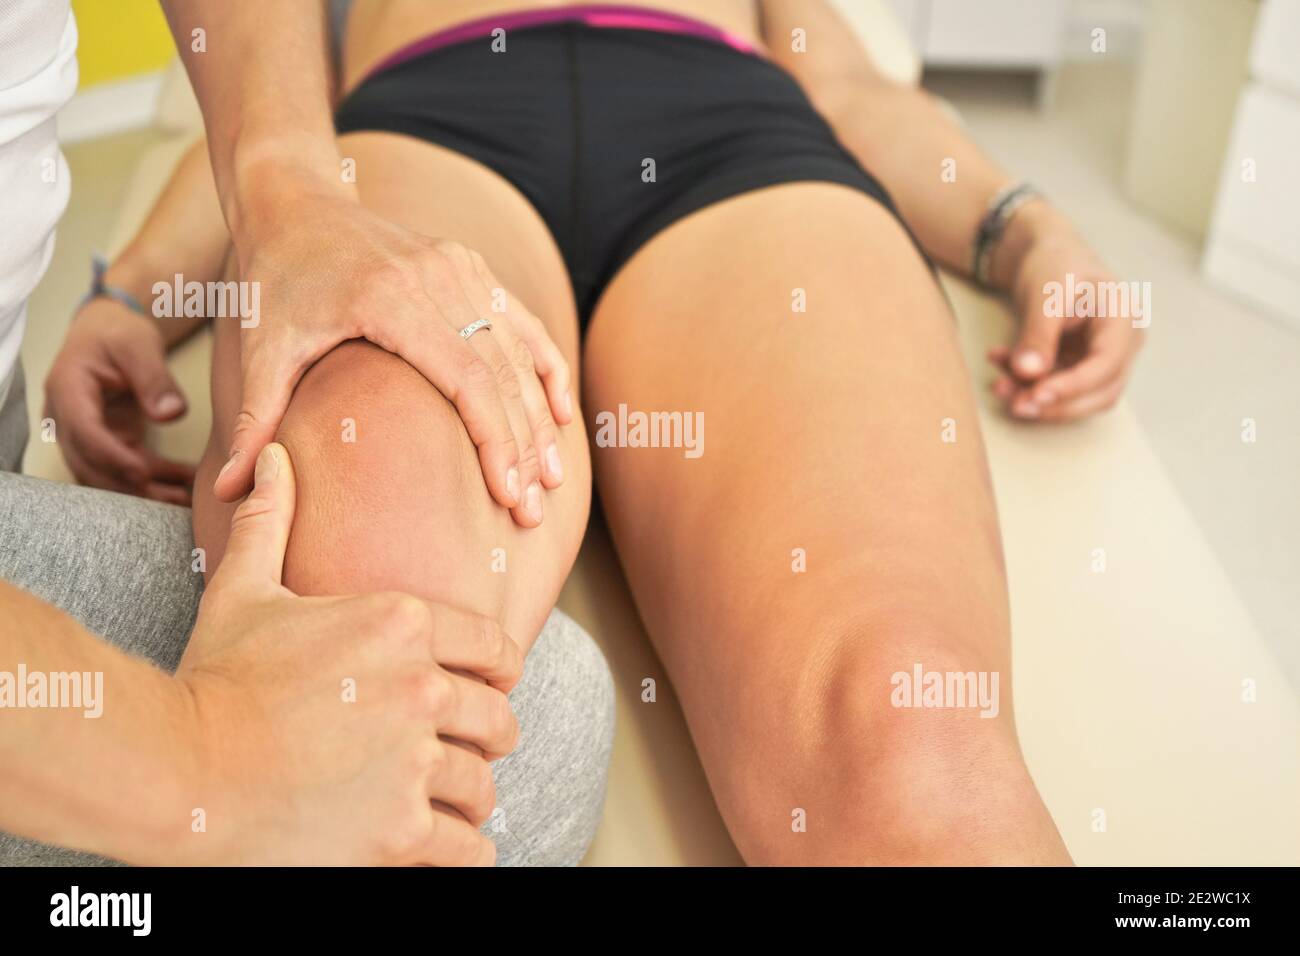 Physiotherapist massaging leg of her patient lying down on massage table Stock Photo